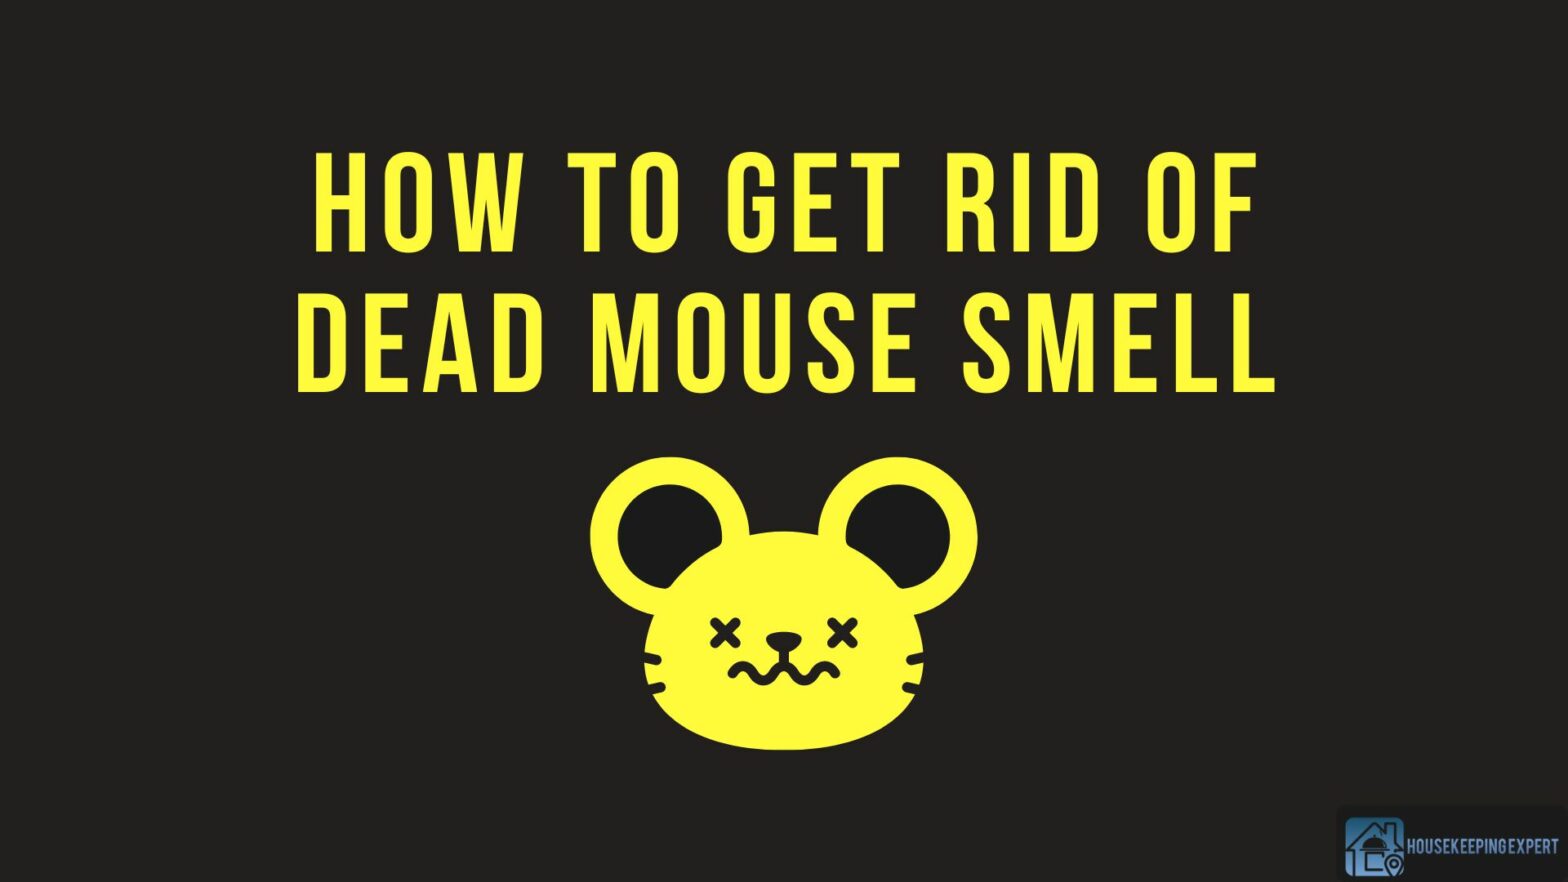 How To Get Rid Of Dead Mouse Smell